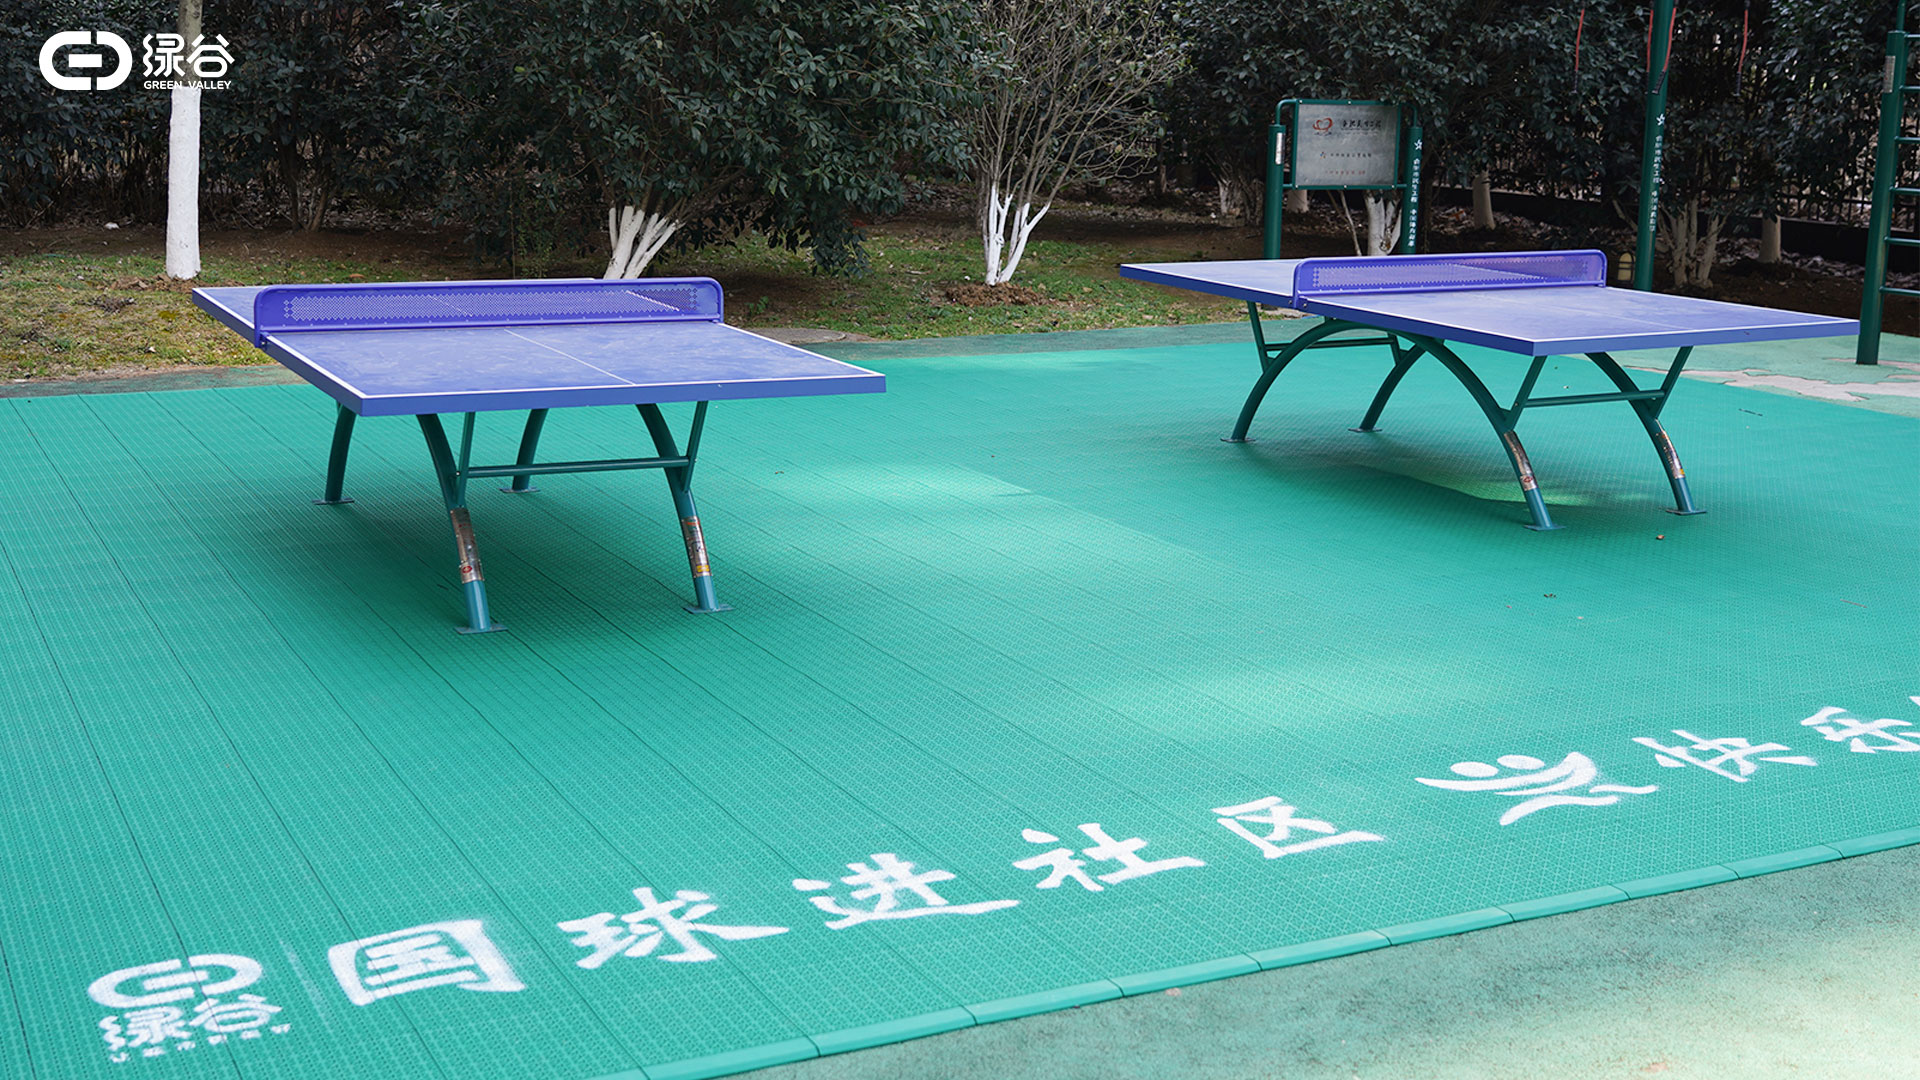 Table tennis courts have entered 30+ Anhui communities